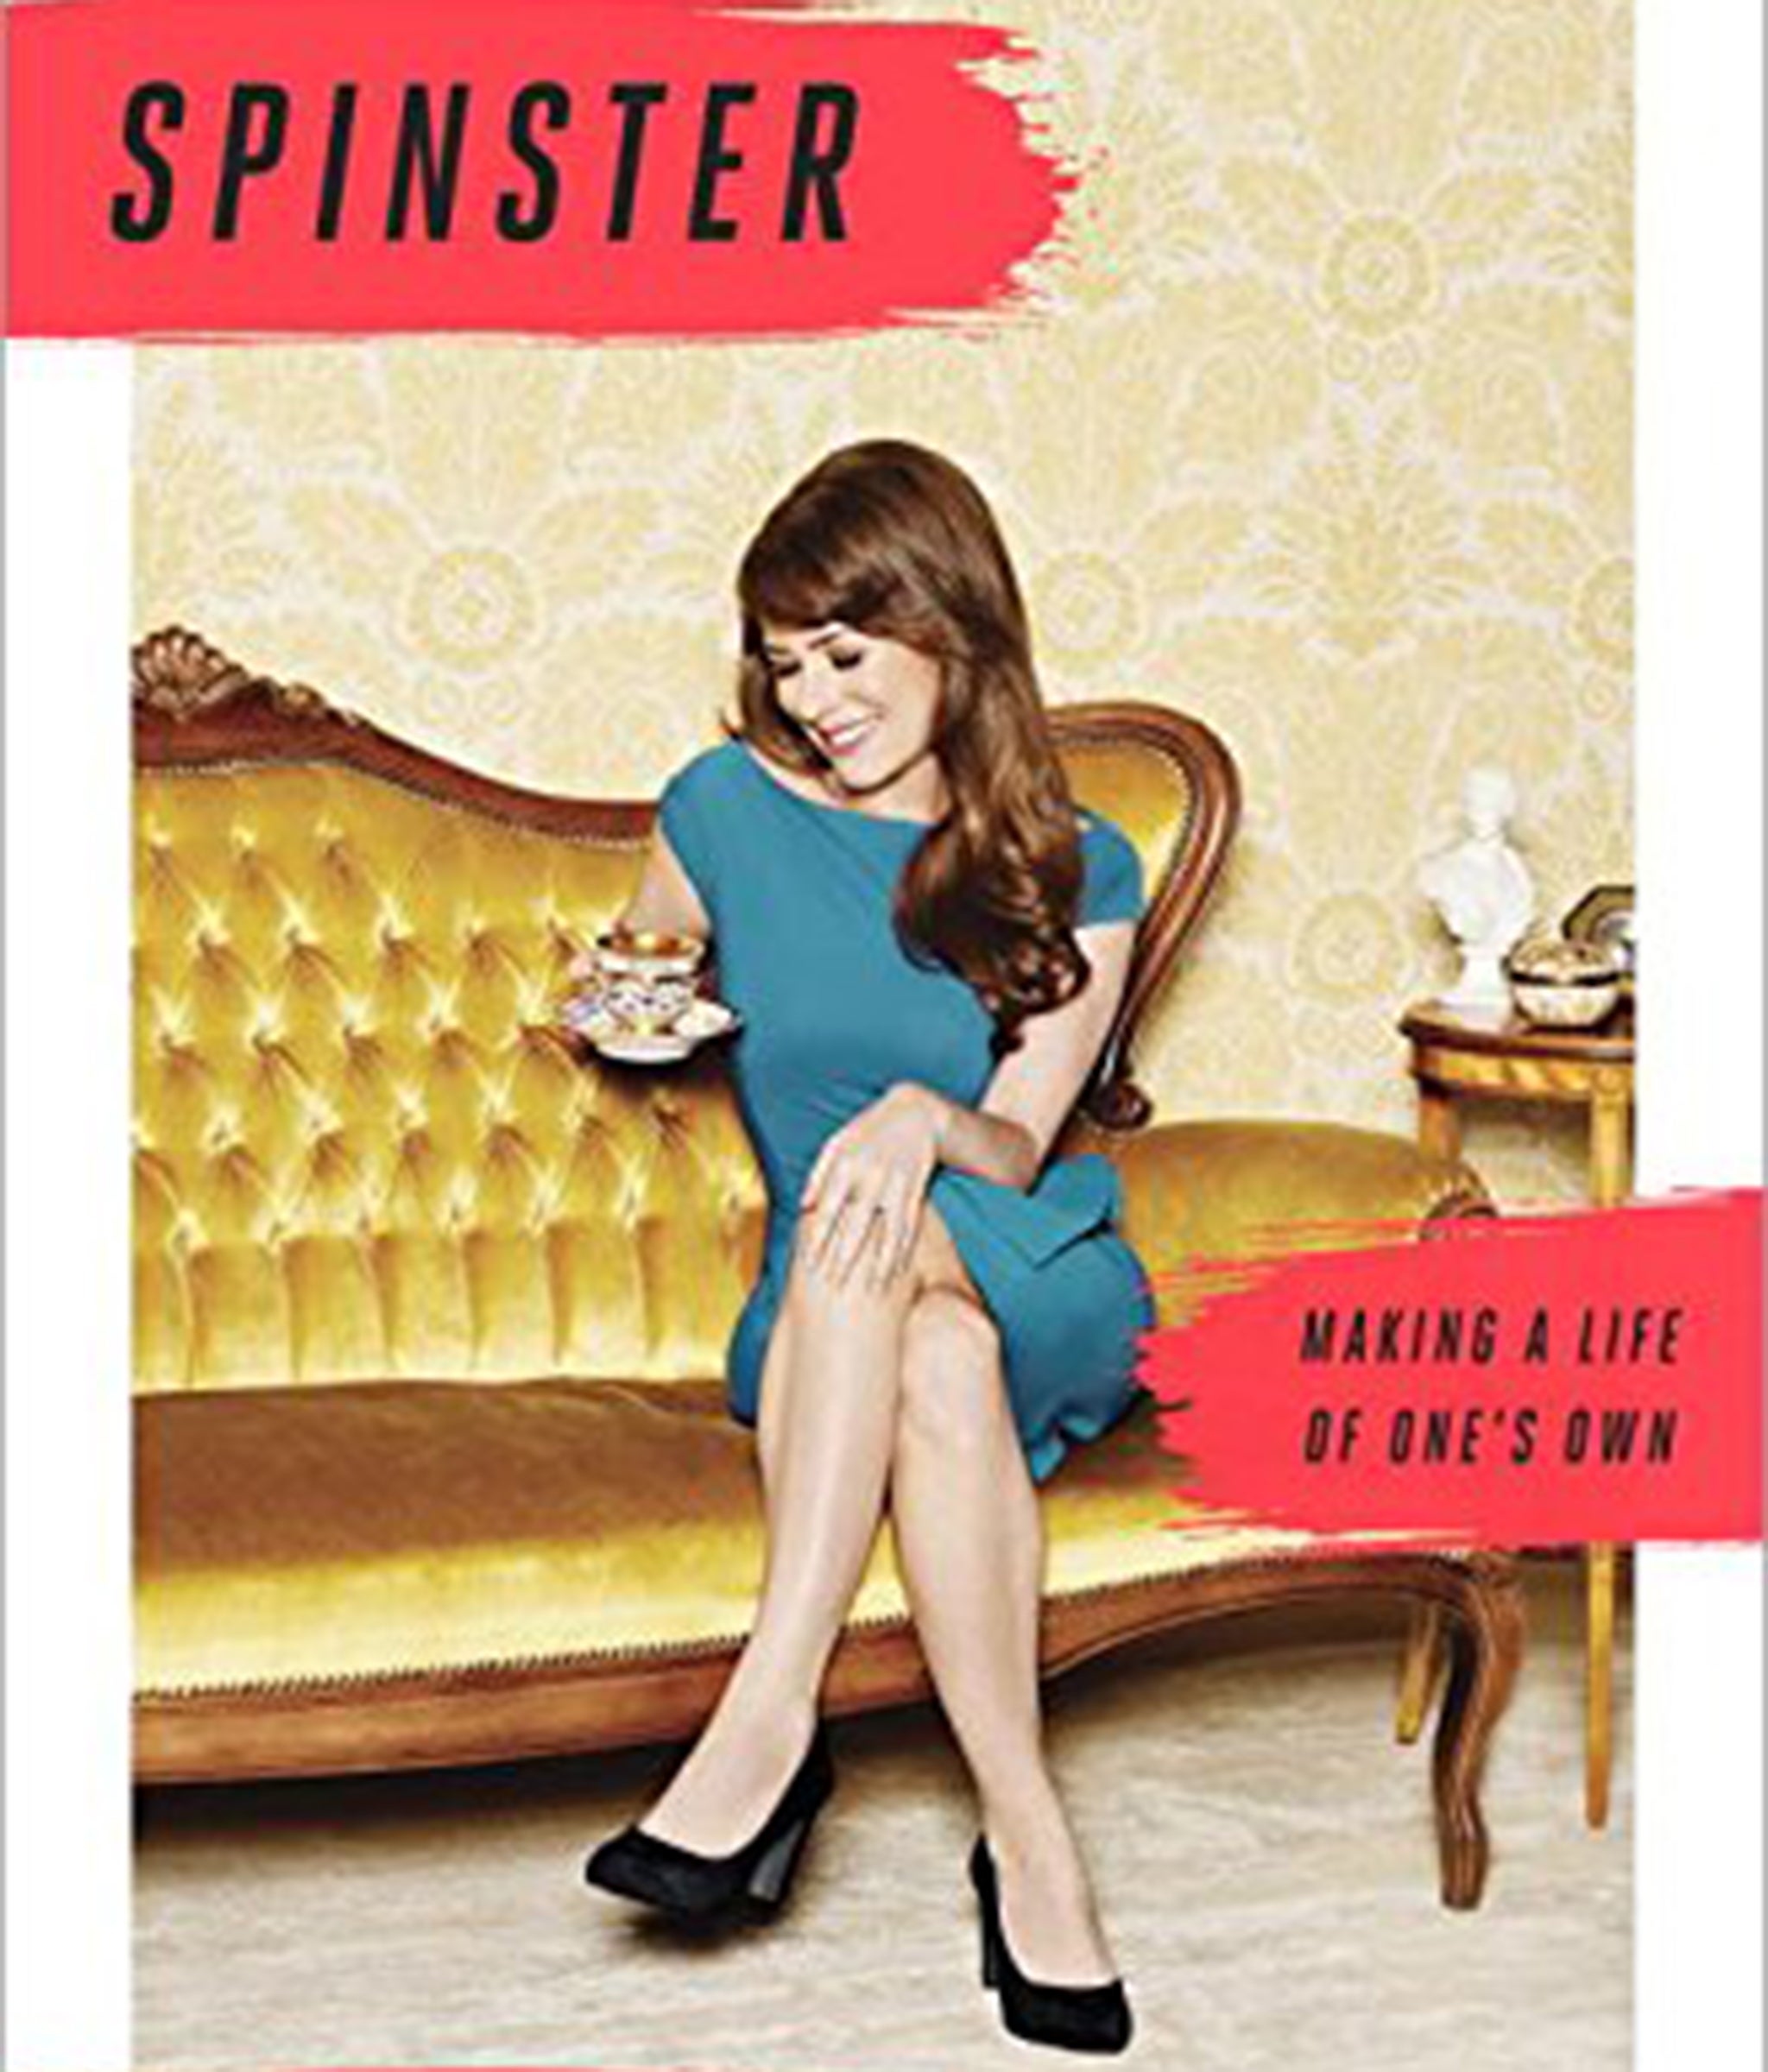 Spinster: A Life of One’s Own by Kate Bolick